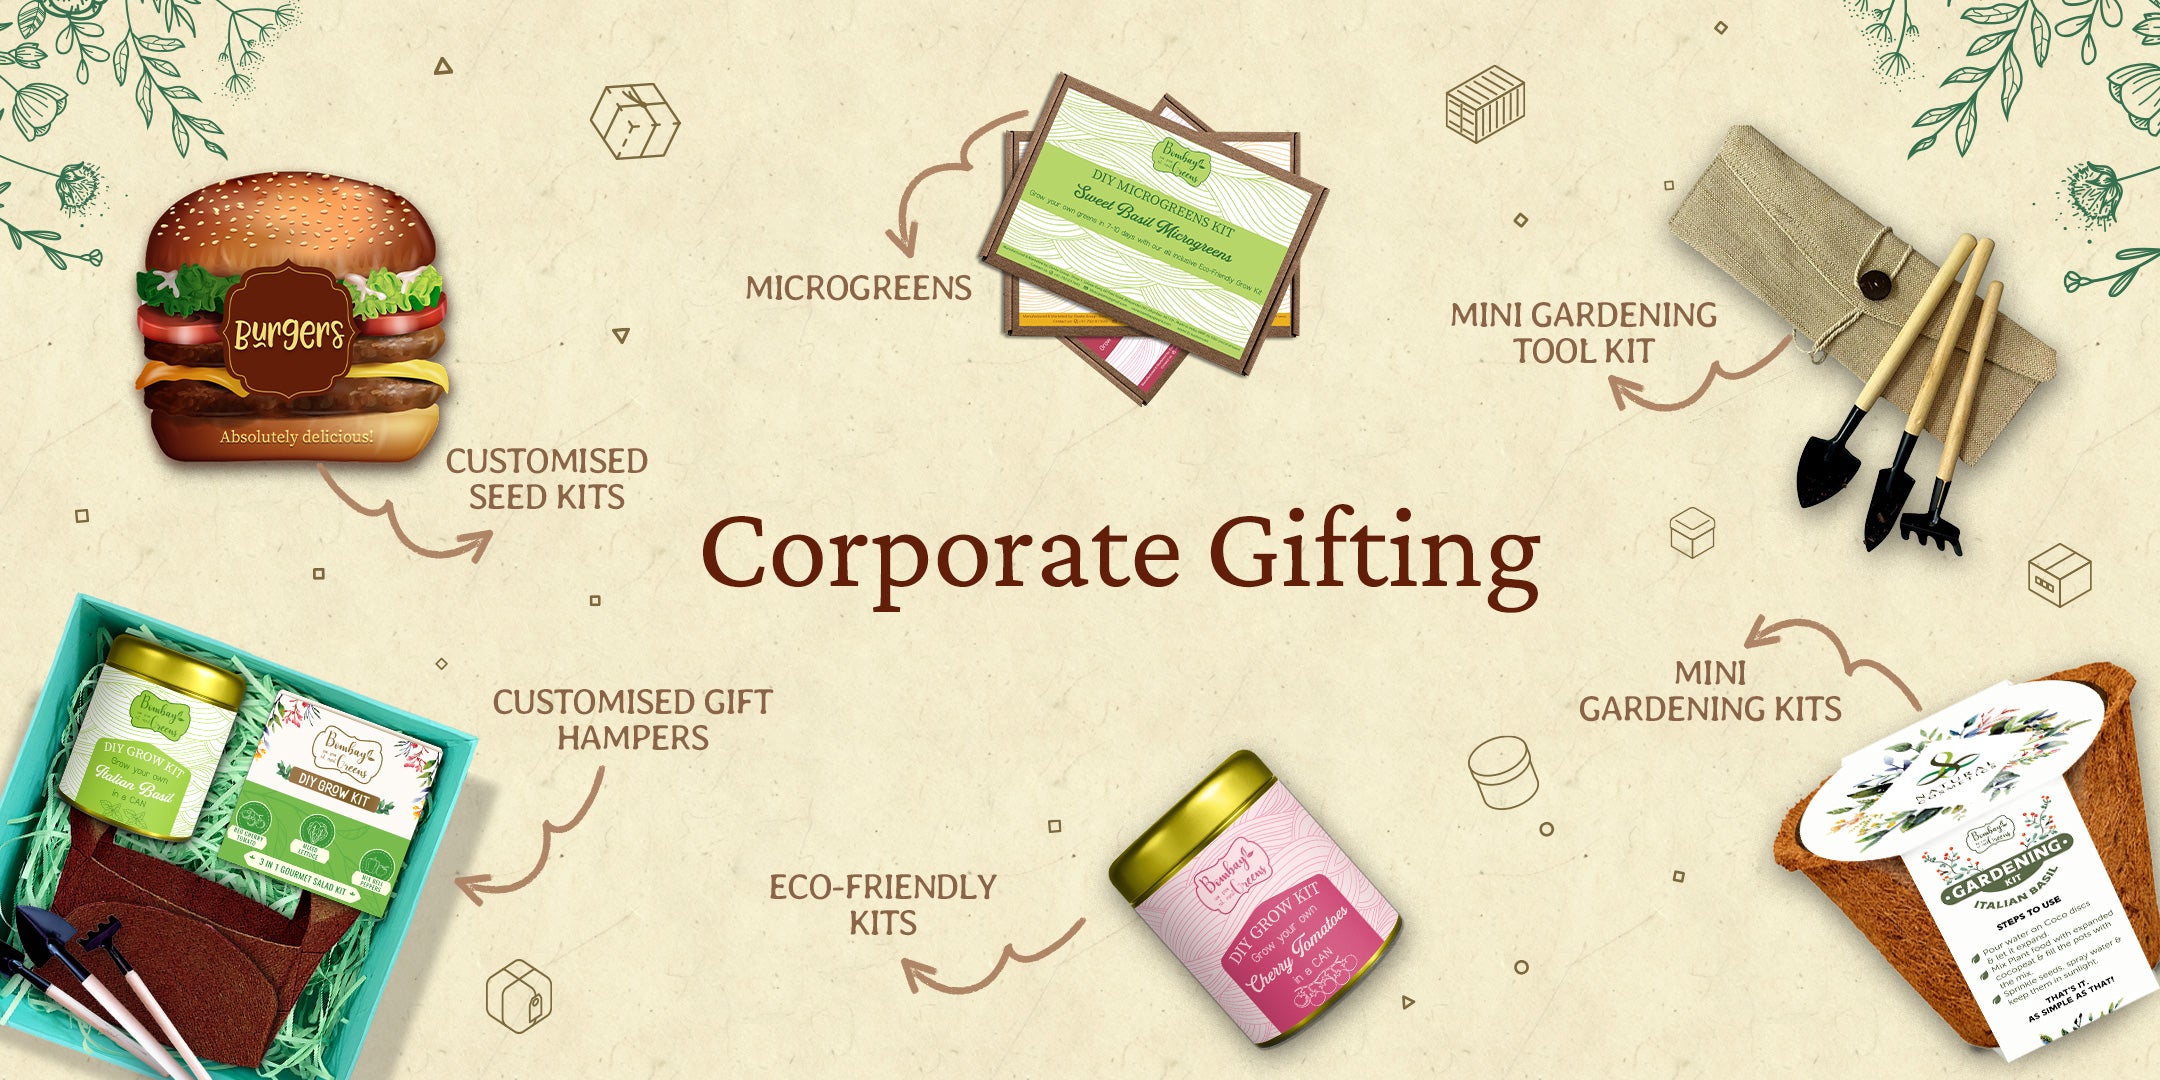 Corporate Gift Ideas for Women's Day